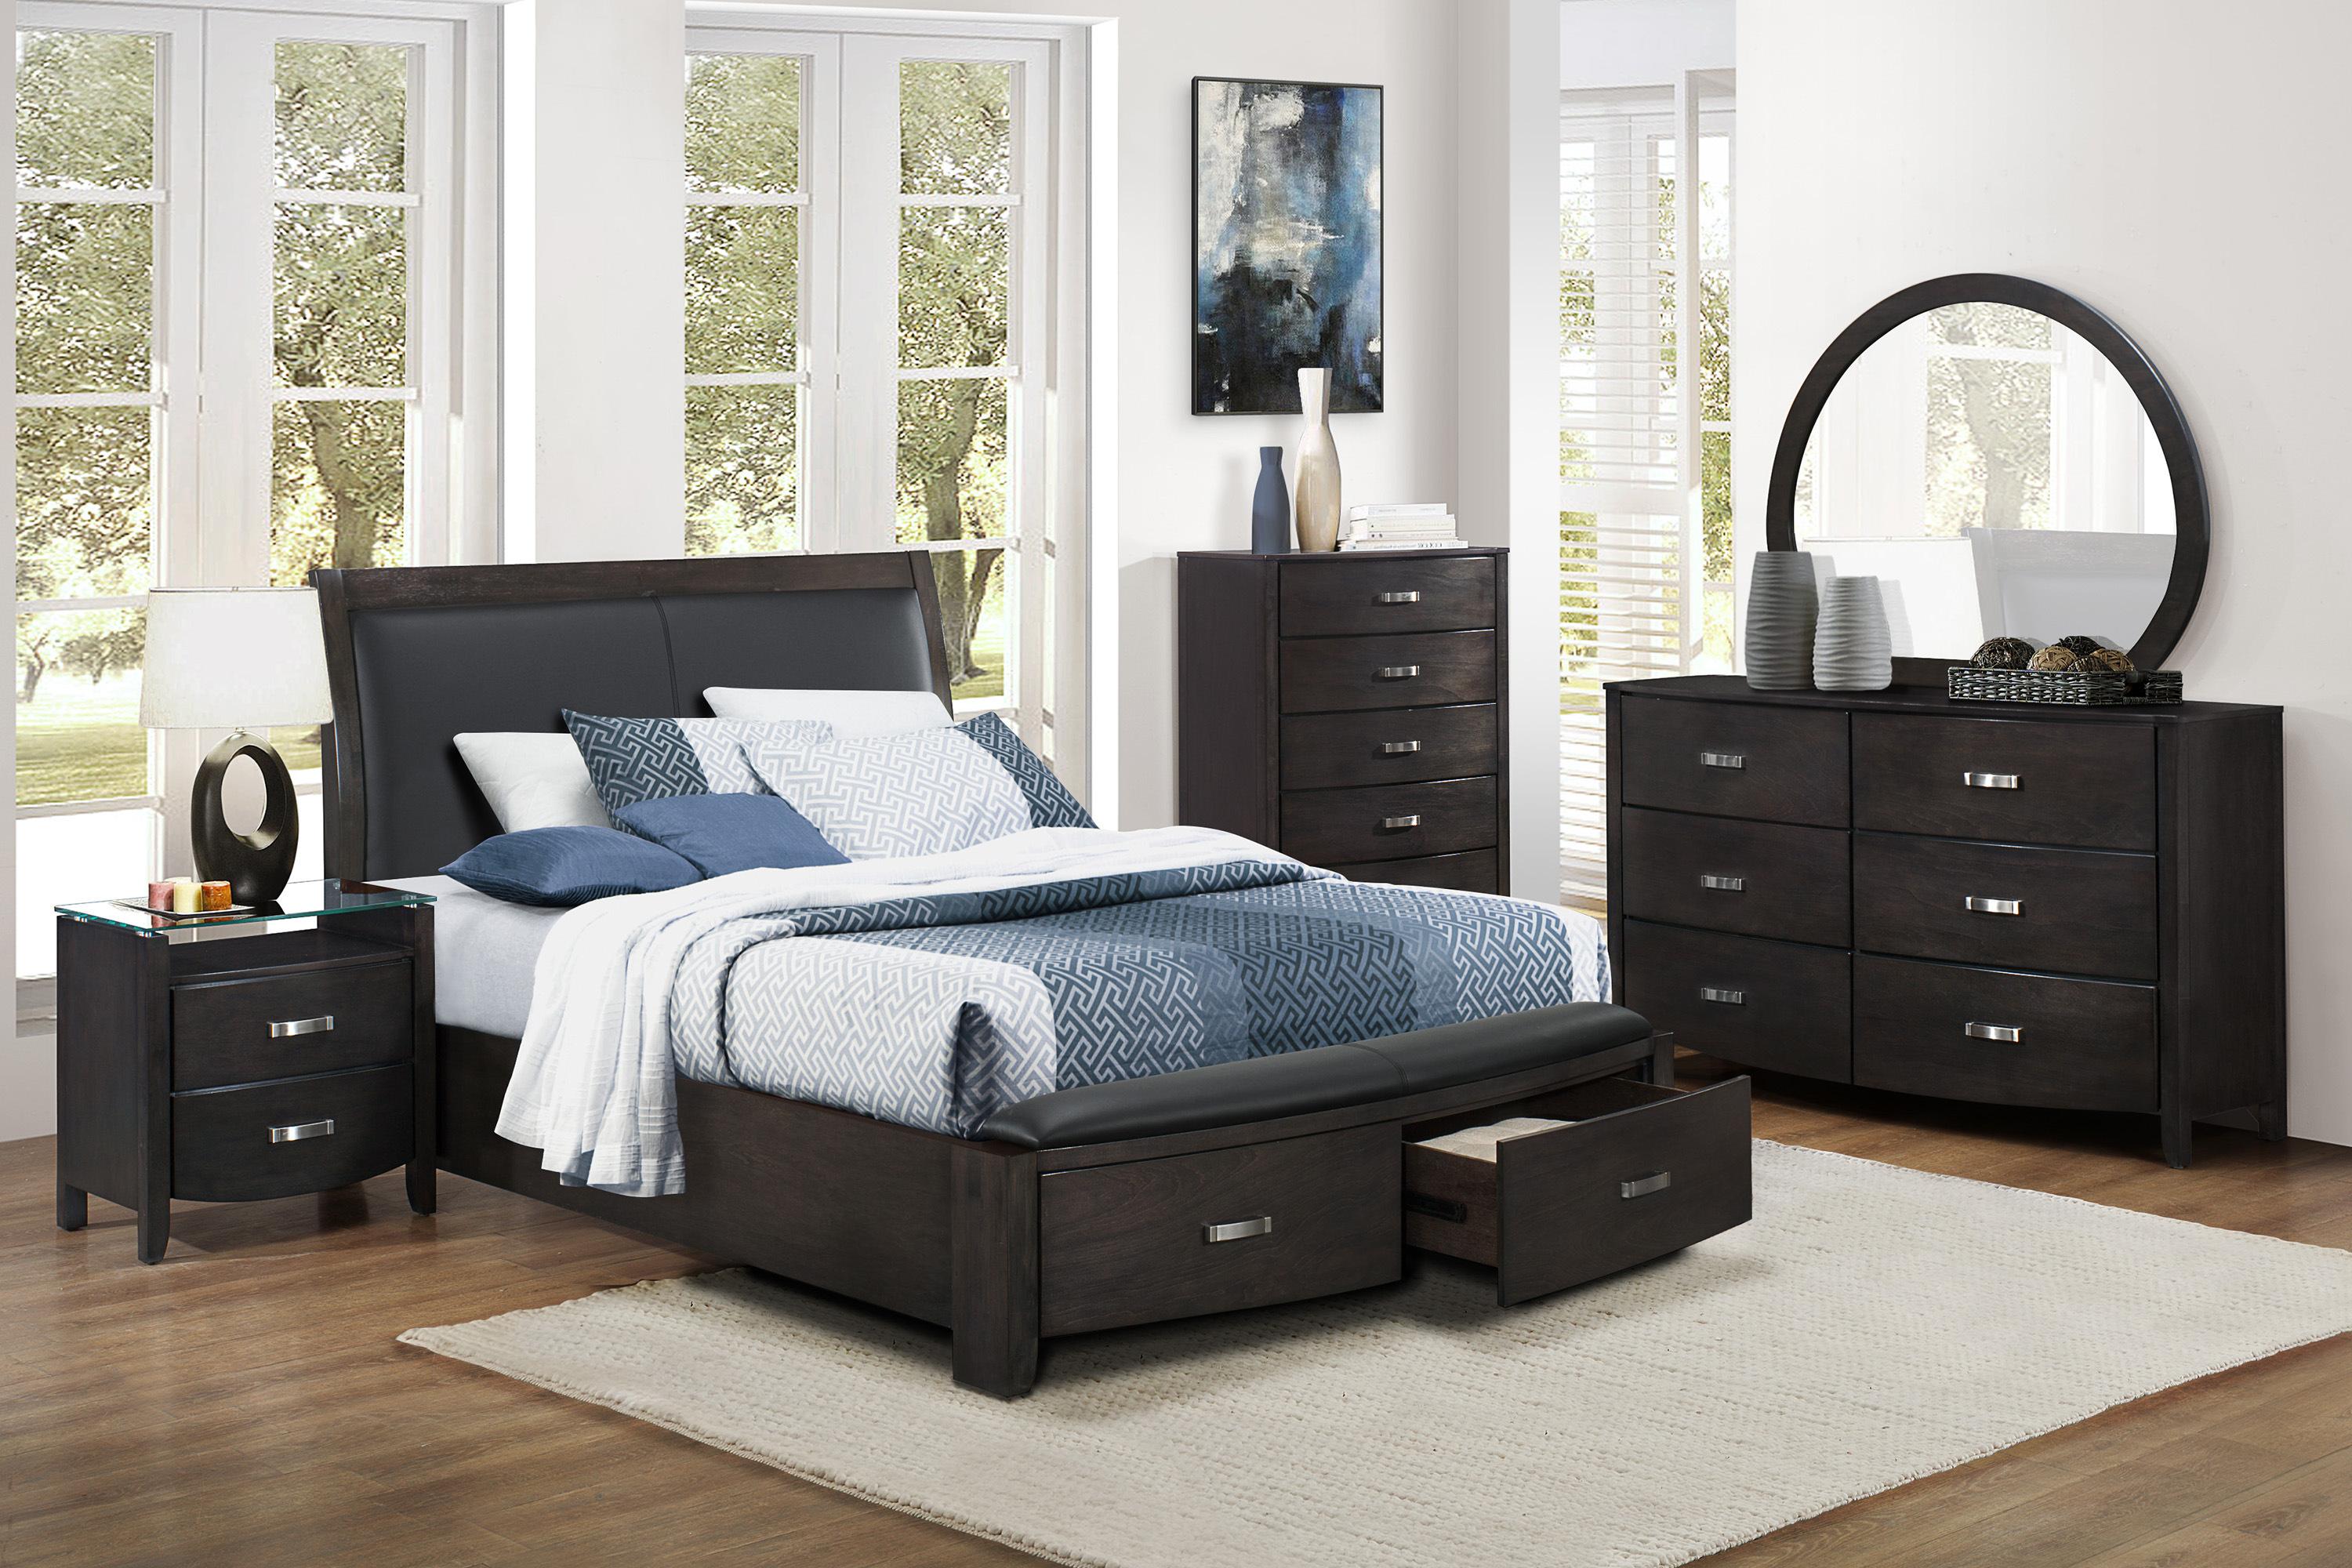 Contemporary Bedroom Set 1737KNGY-1CK-6PC Lyric 1737KNGY-1CK-6PC in Gray Faux Leather